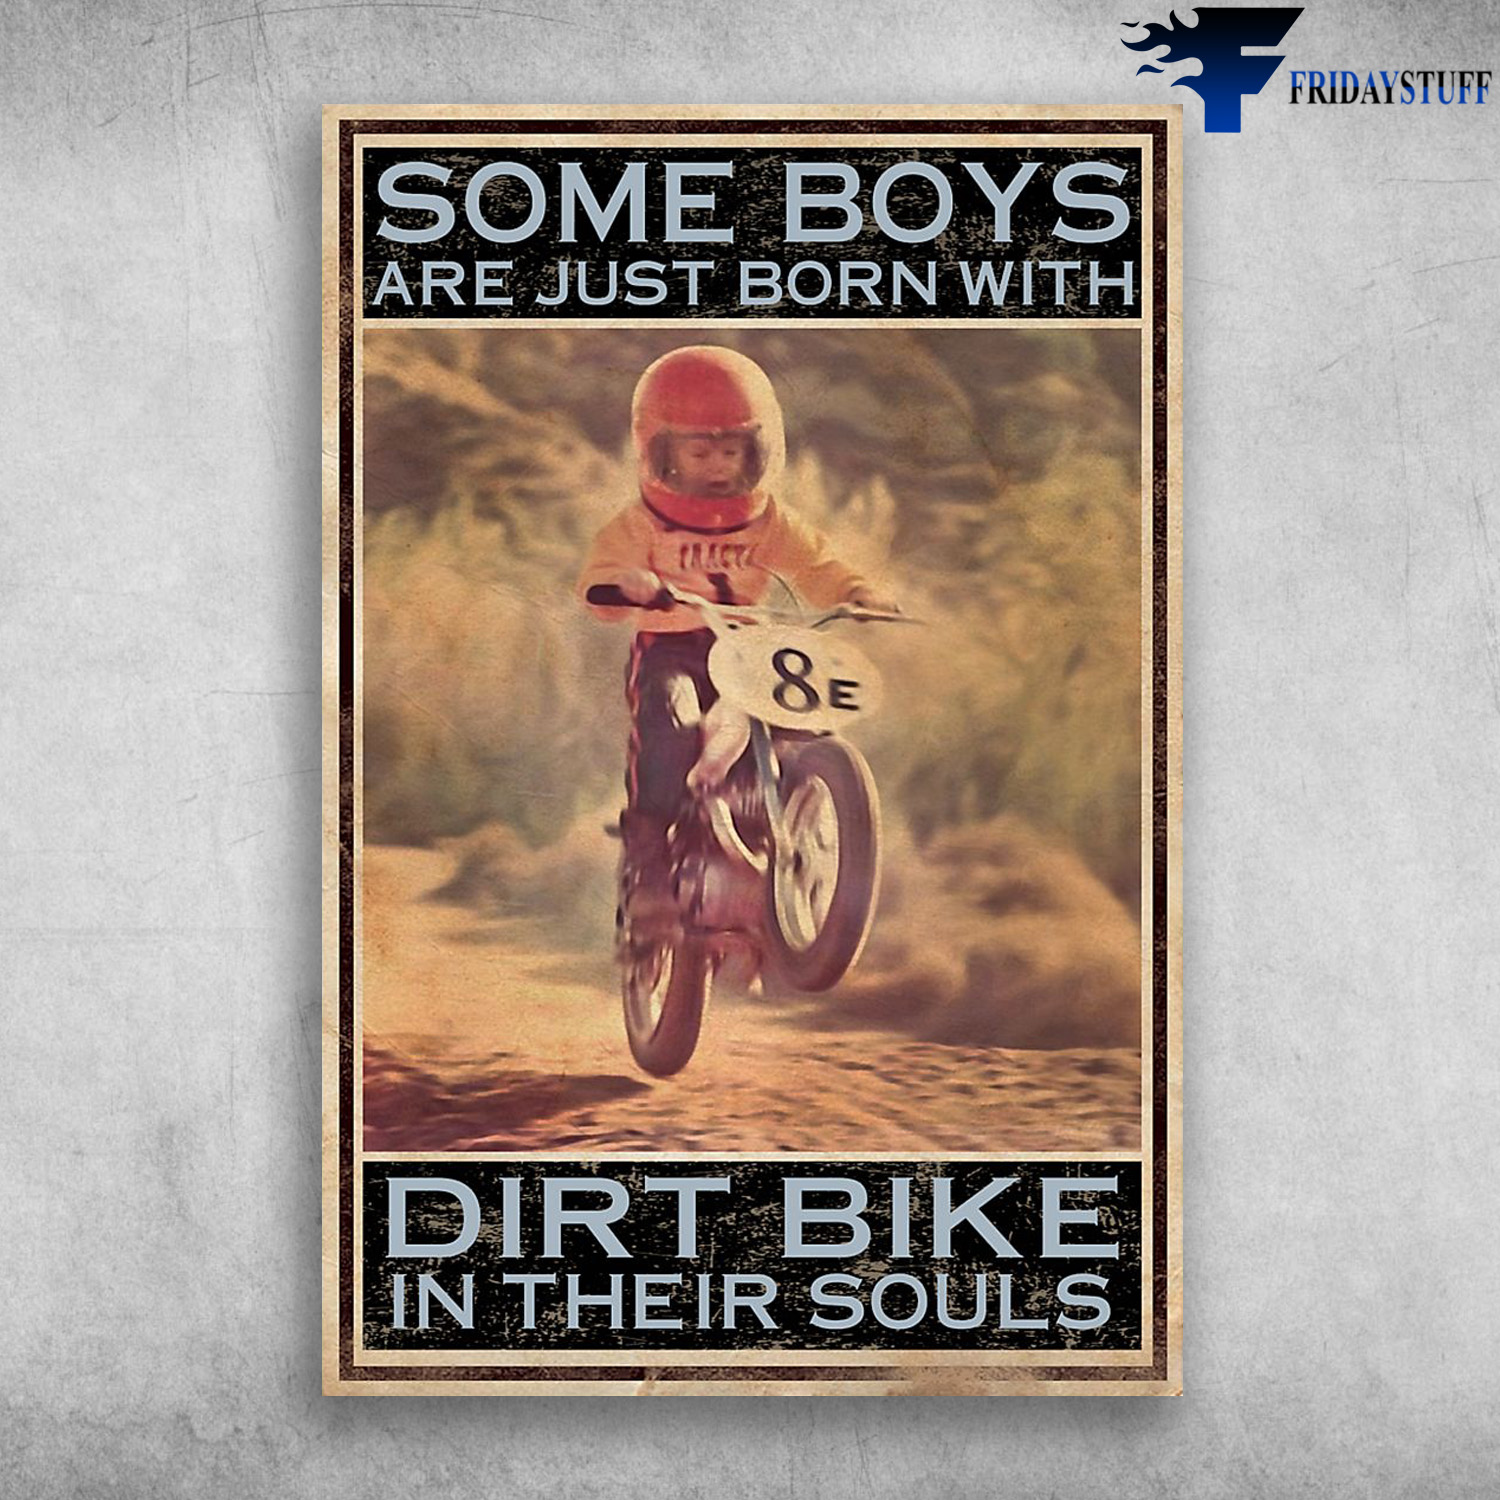 The Boy Dirt Bike - Some Boys Are Just Born With Dirt Bike In Their Souls